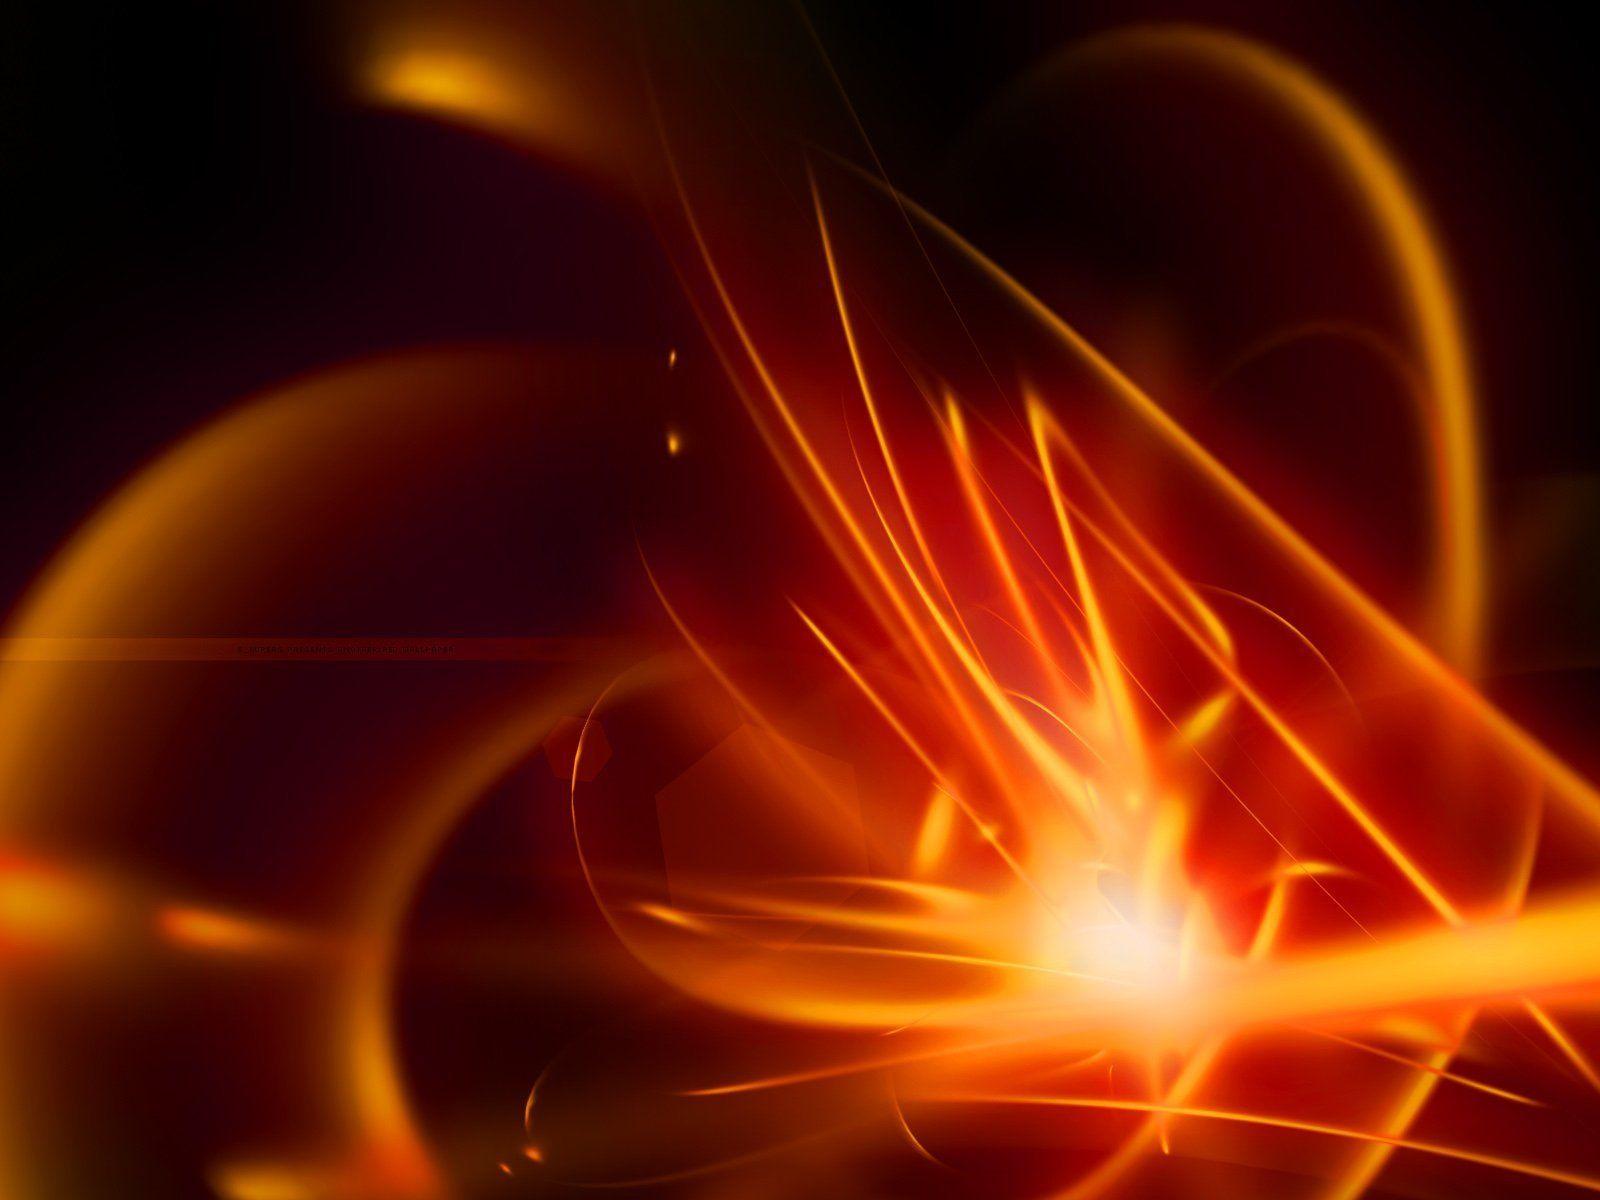 Fire Abstract Wallpaper, High Quality Pics of Fire Abstract in Nice